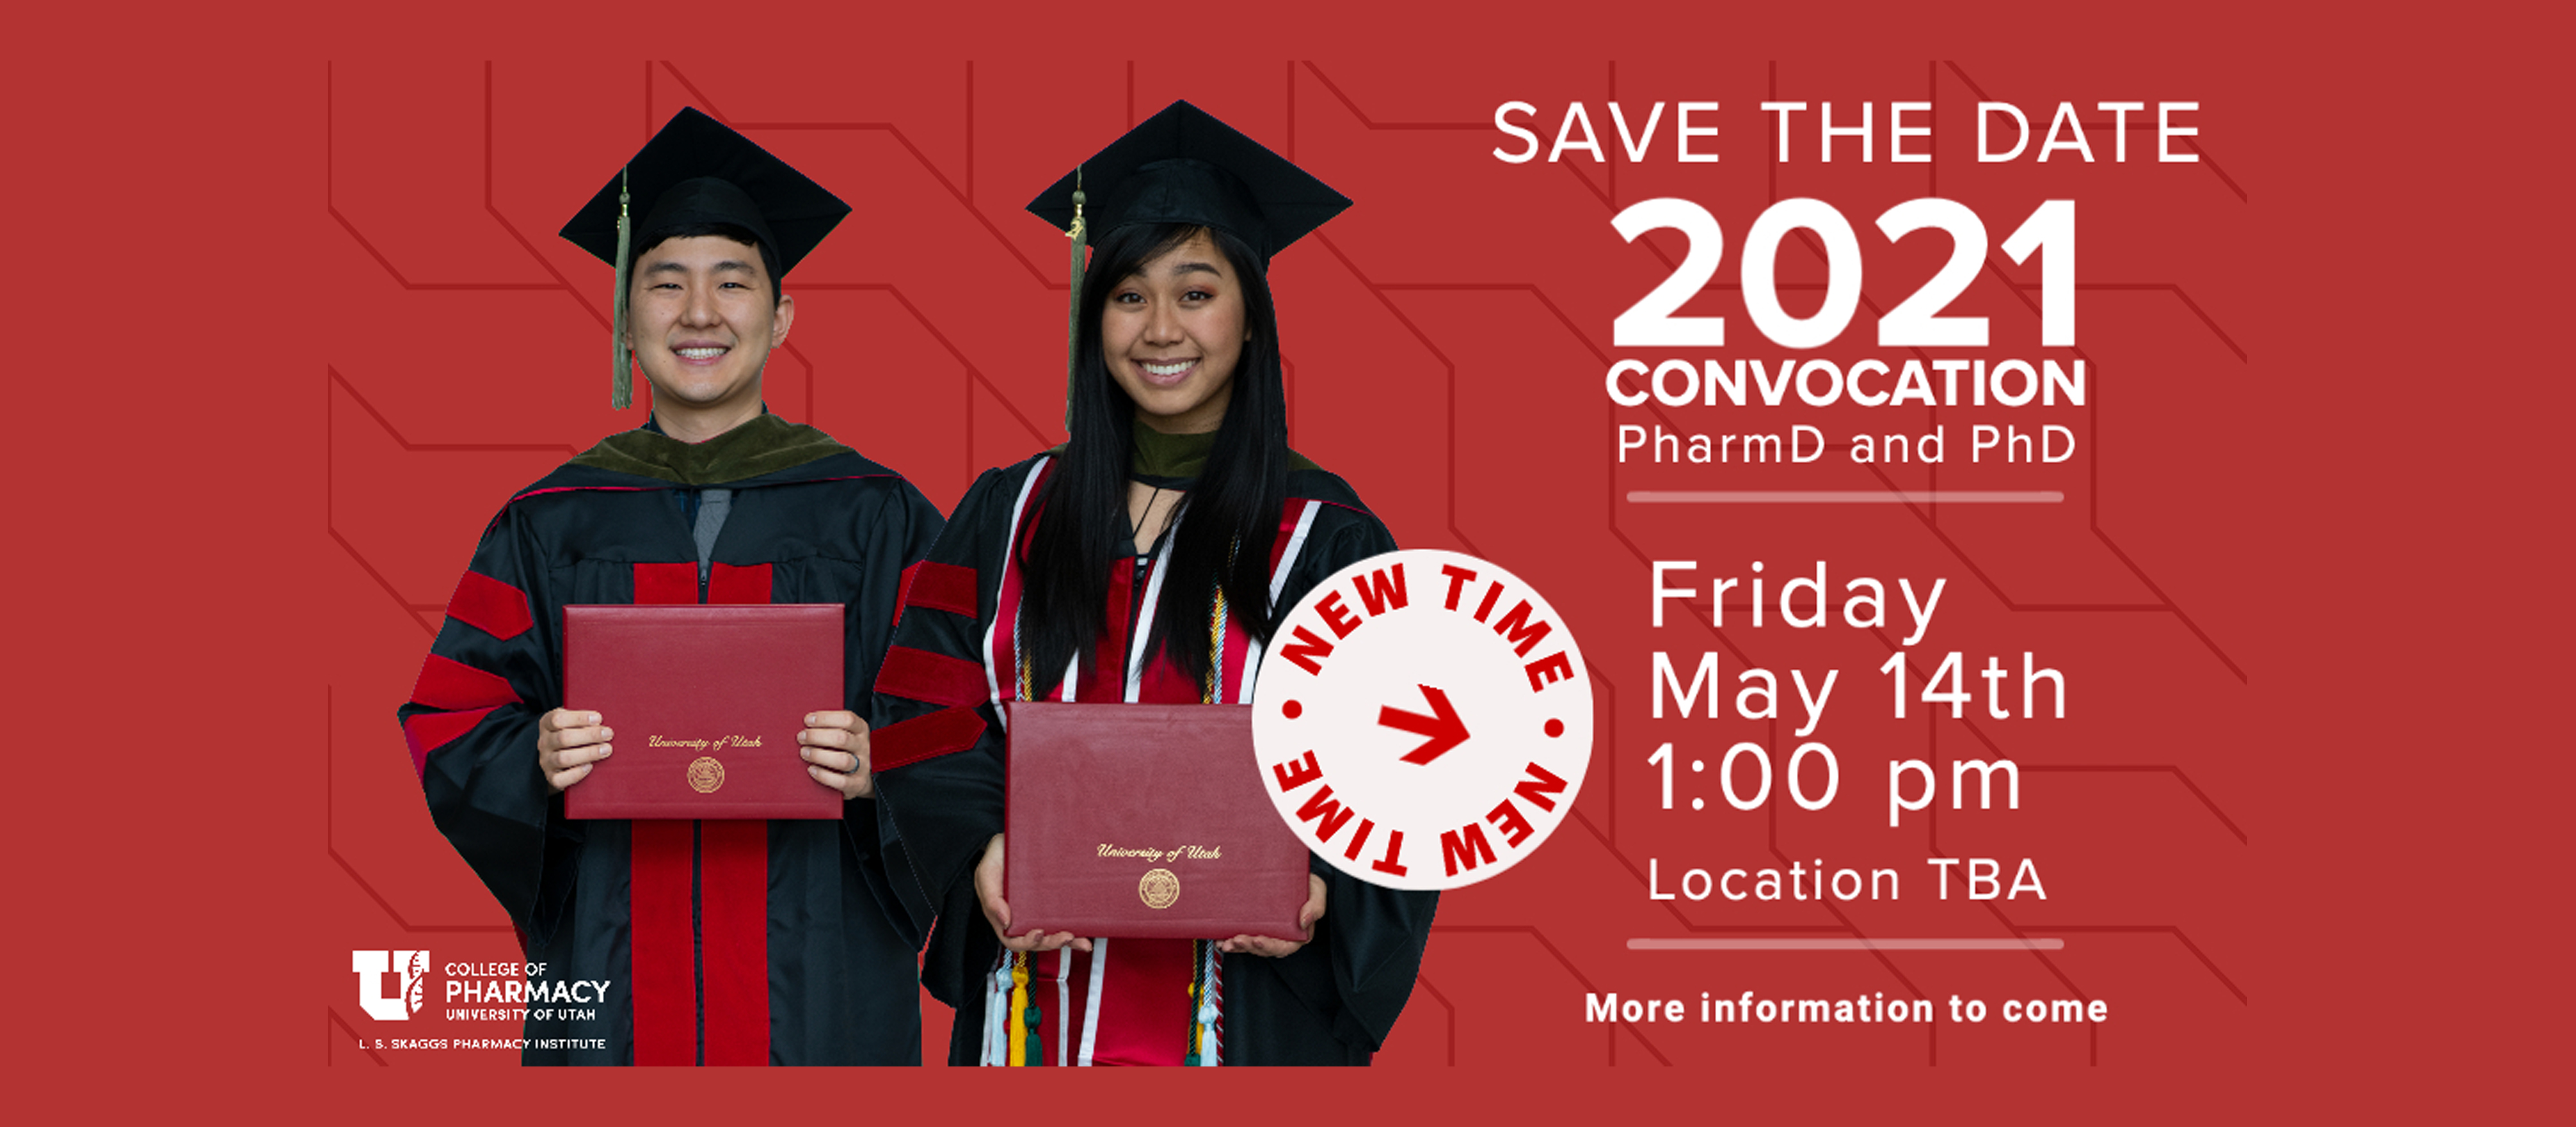 2021 Convocation save the date flier news